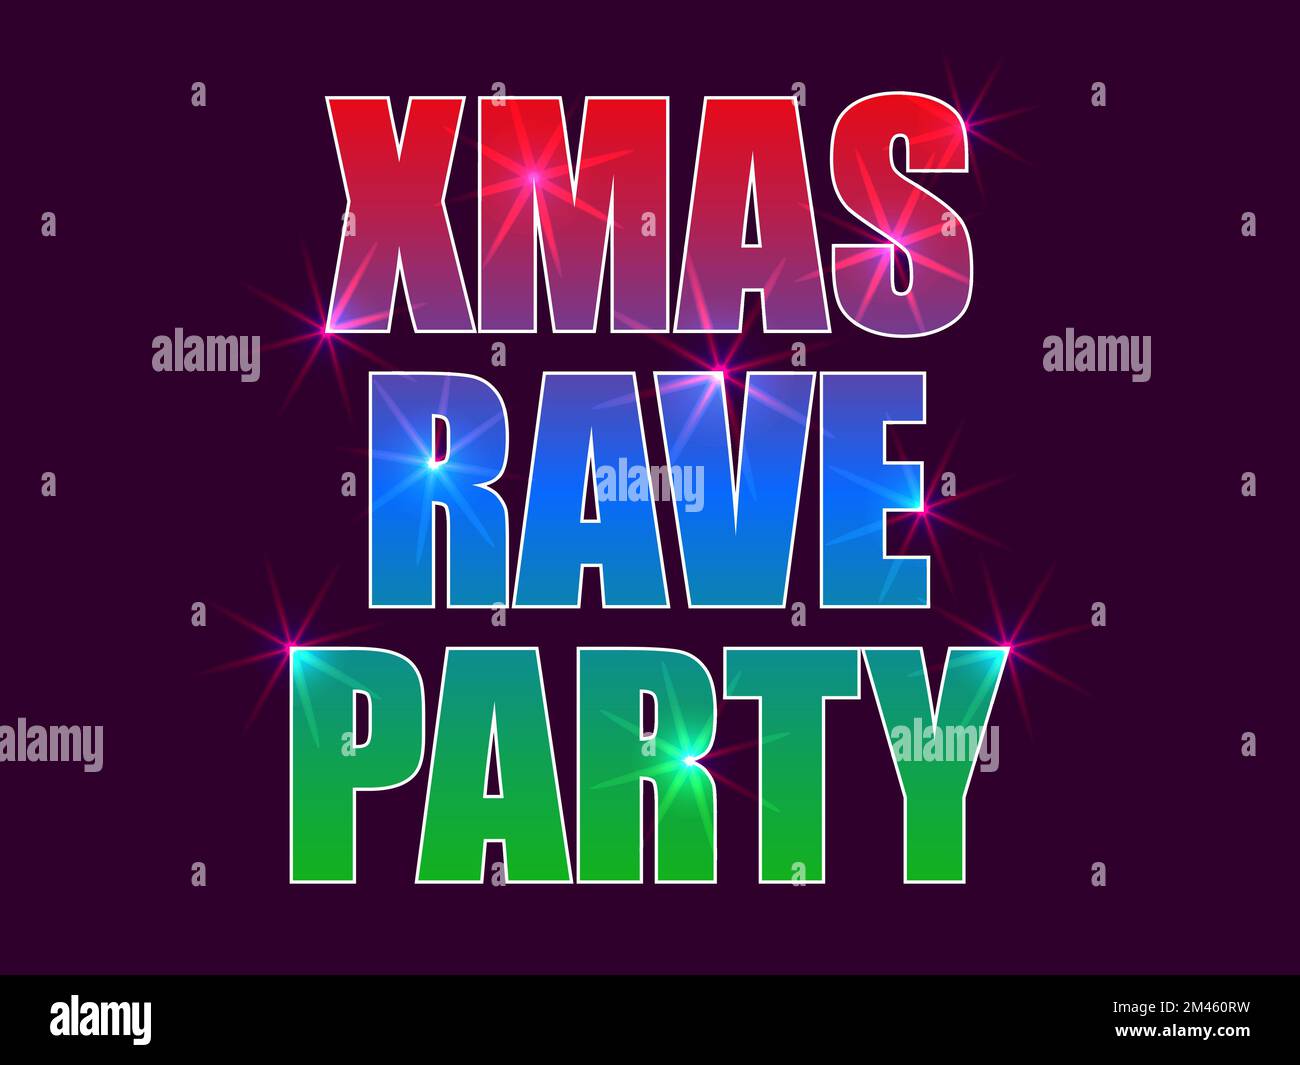 Xmas rave party. Gradient text in red, green and blue. Glow text. Sparkling light. The energy of a rave party. Design for posters, banners and promoti Stock Vector